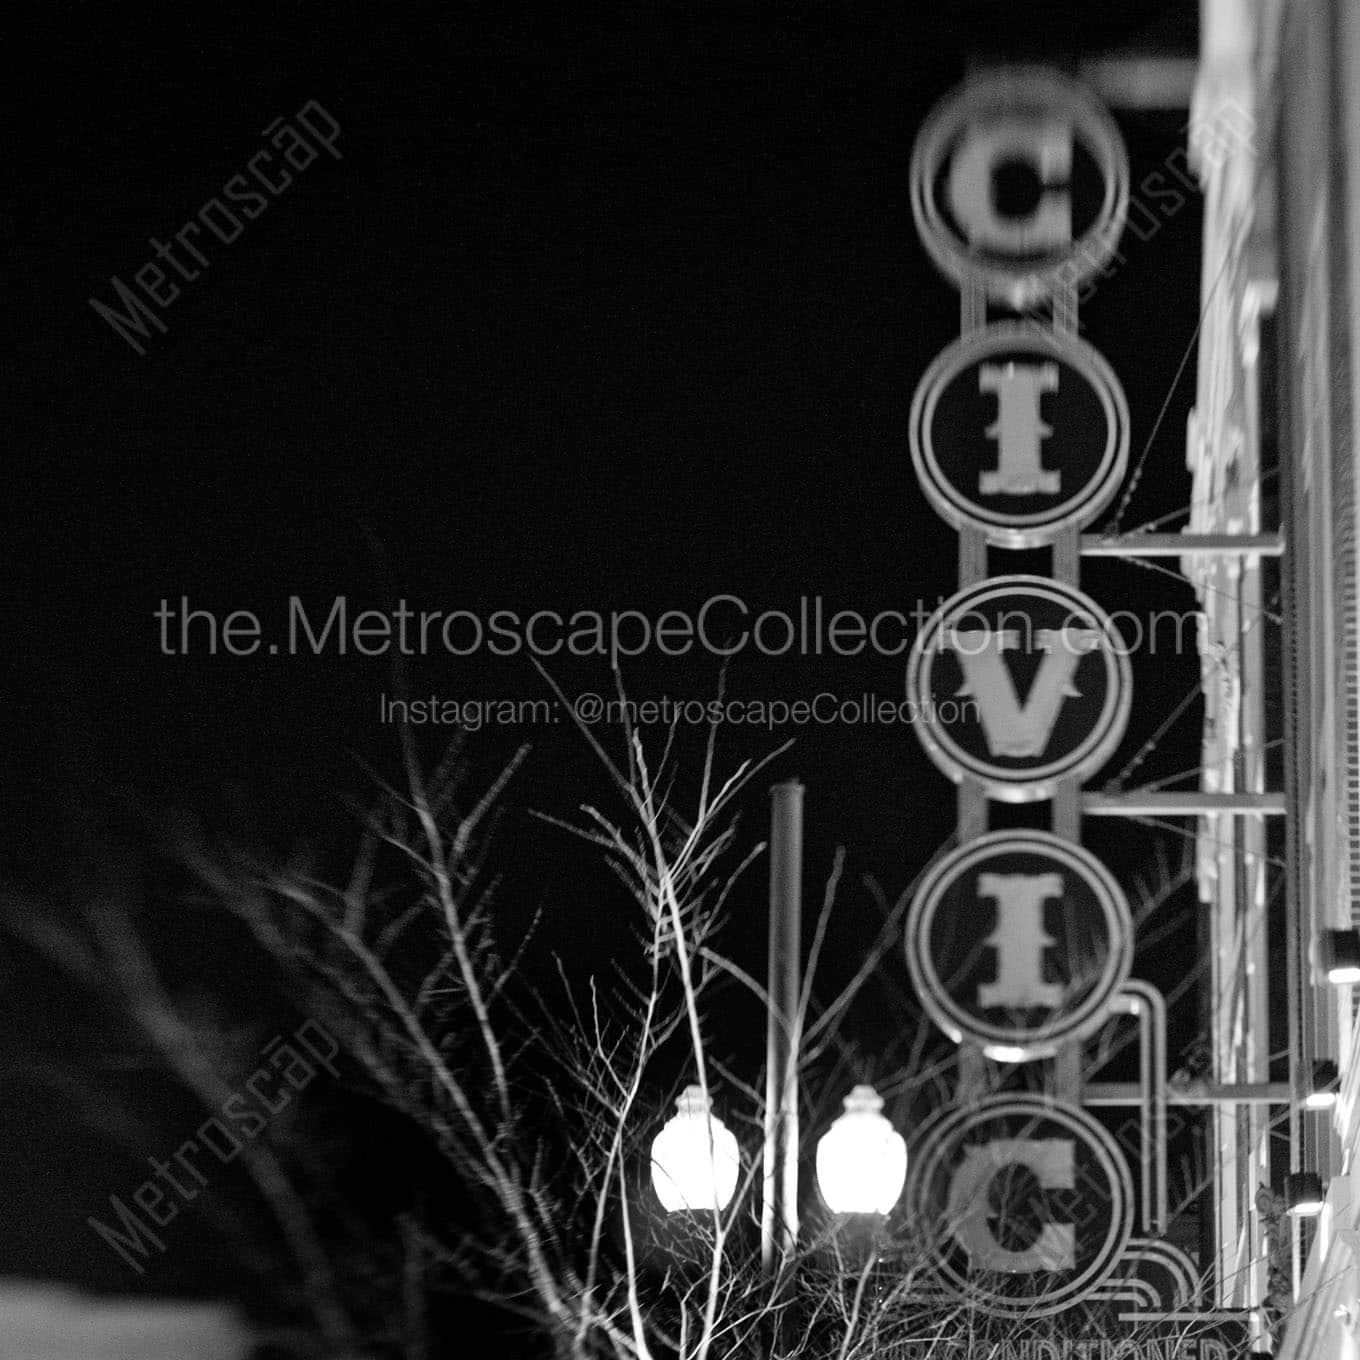 civic theater sign at night Black & White Office Art